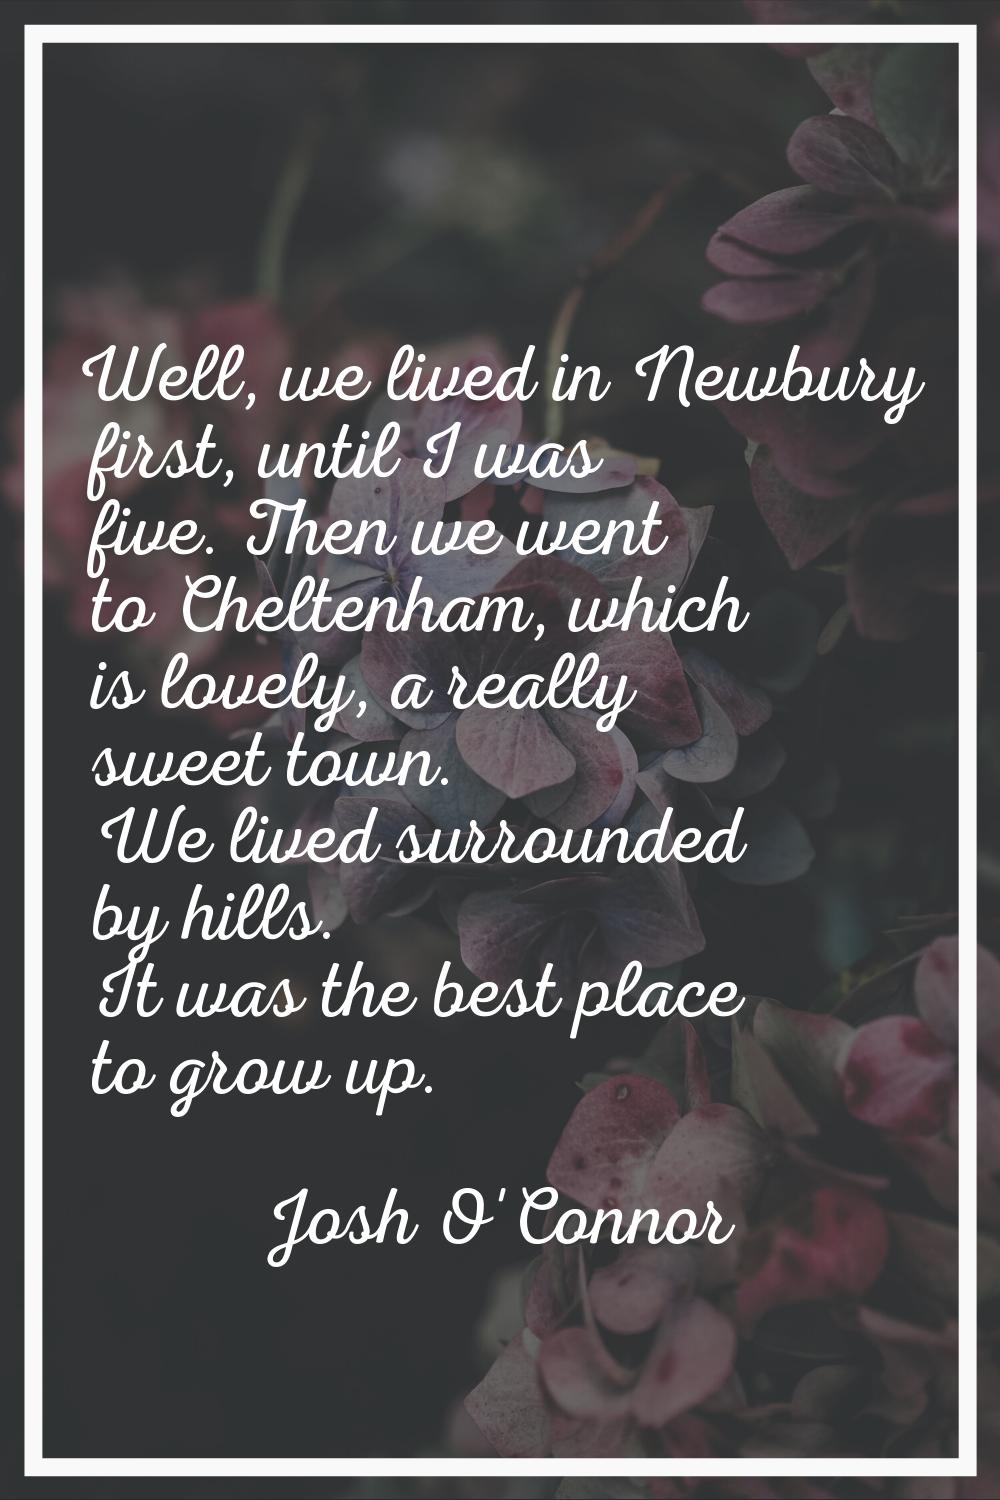 Well, we lived in Newbury first, until I was five. Then we went to Cheltenham, which is lovely, a r